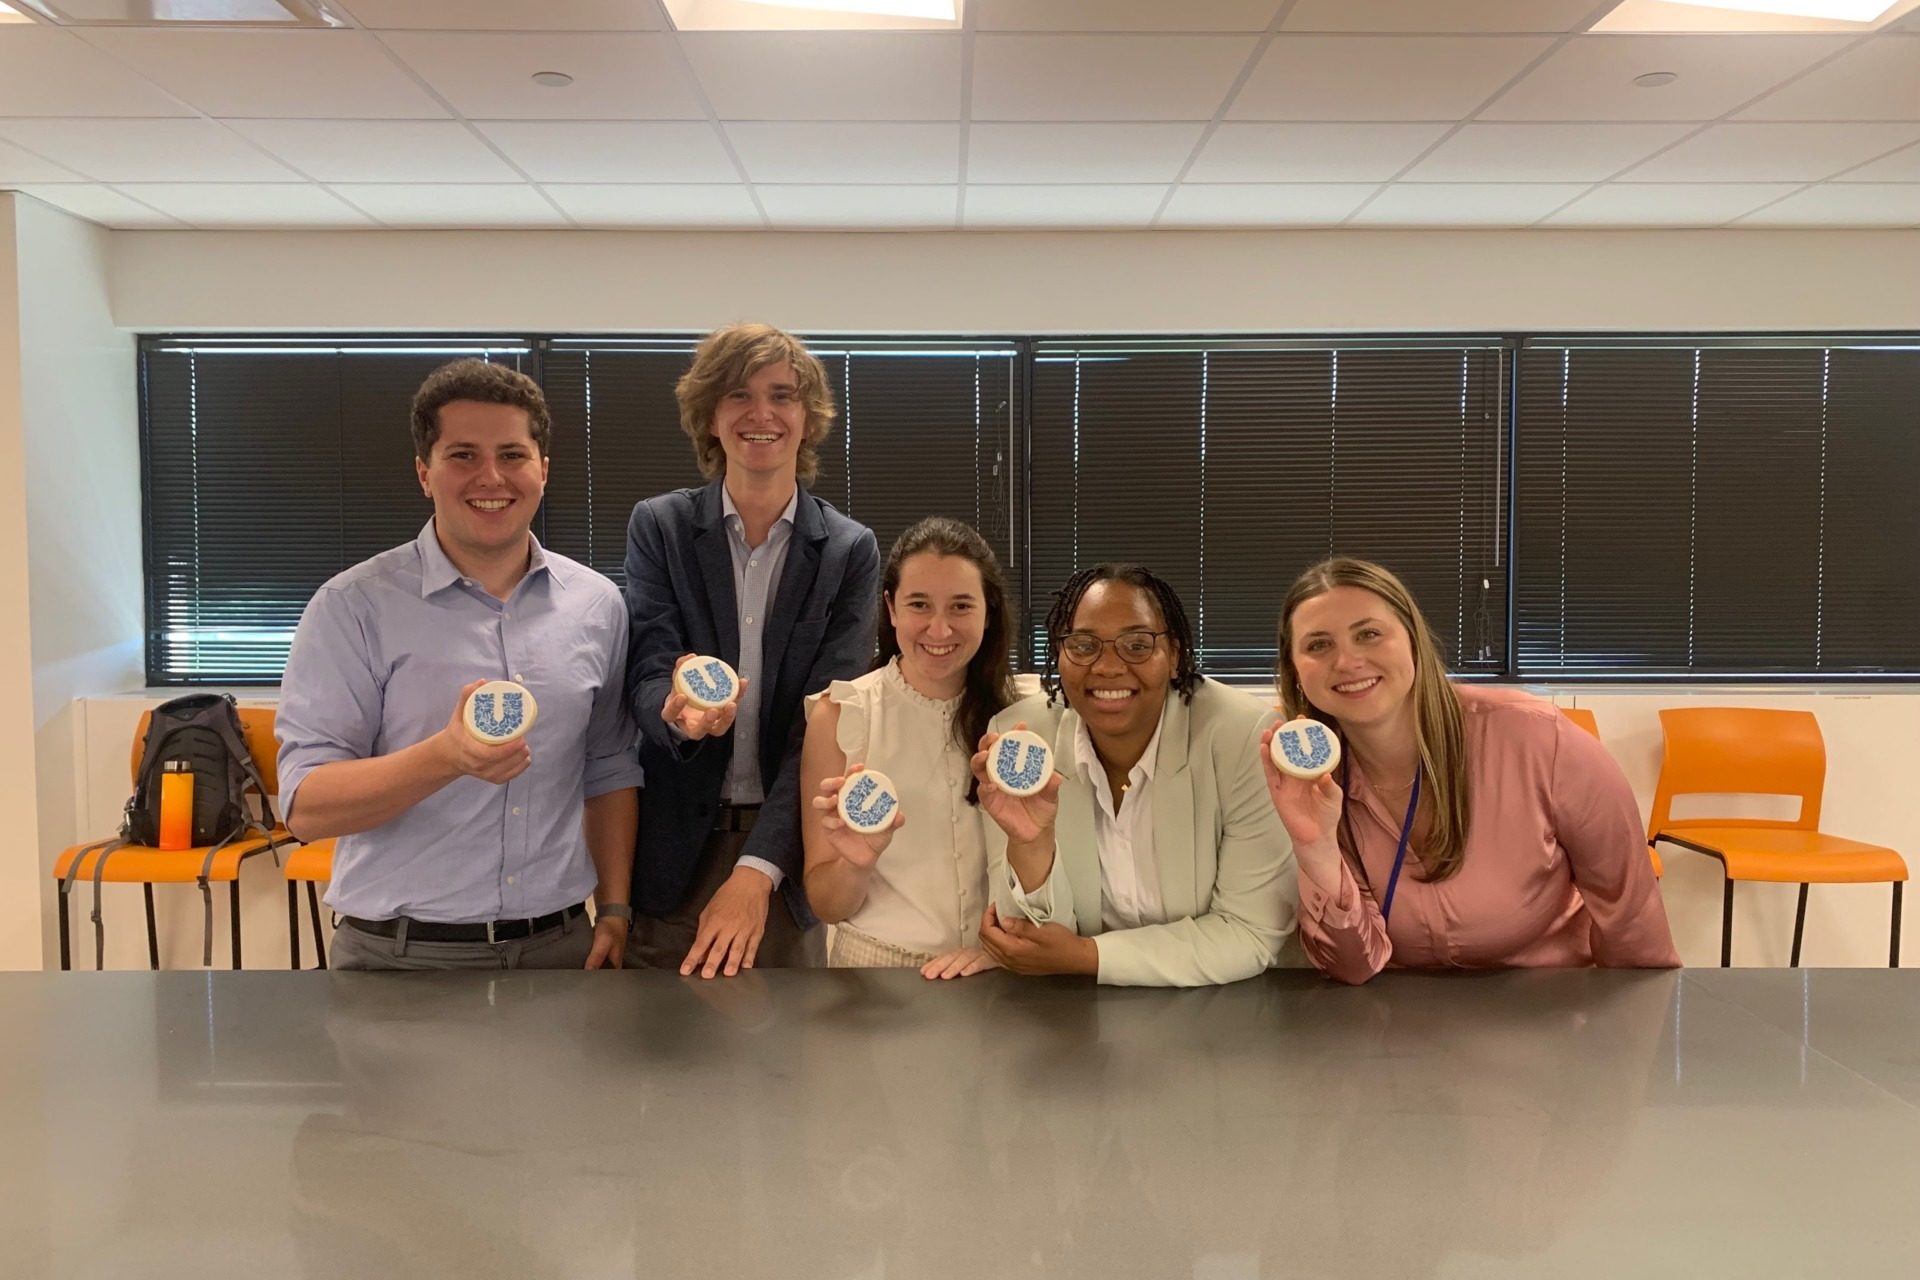 Five Unilever interns, including Allison Brenner, pose with cookies that have the Unilever logo.